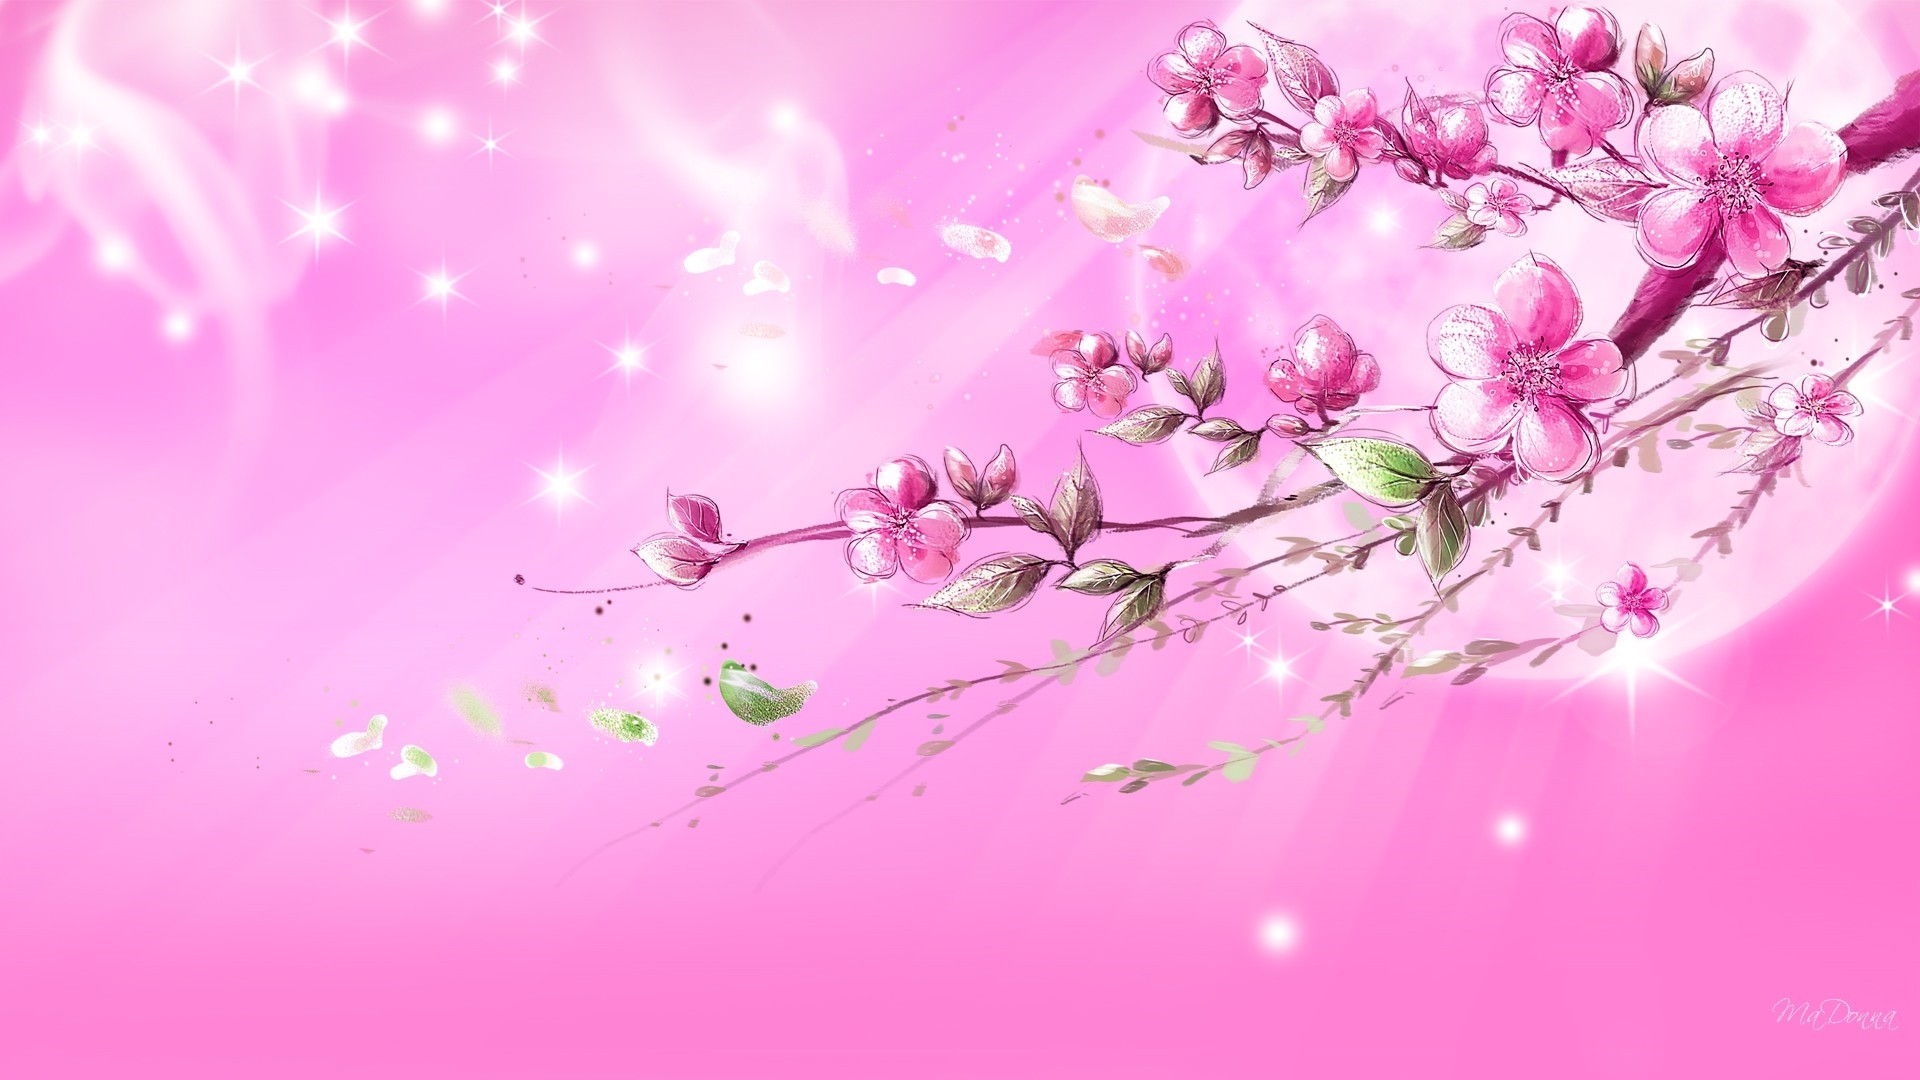 1920x1080 ... Cool Pink Wallpapers dream in pink